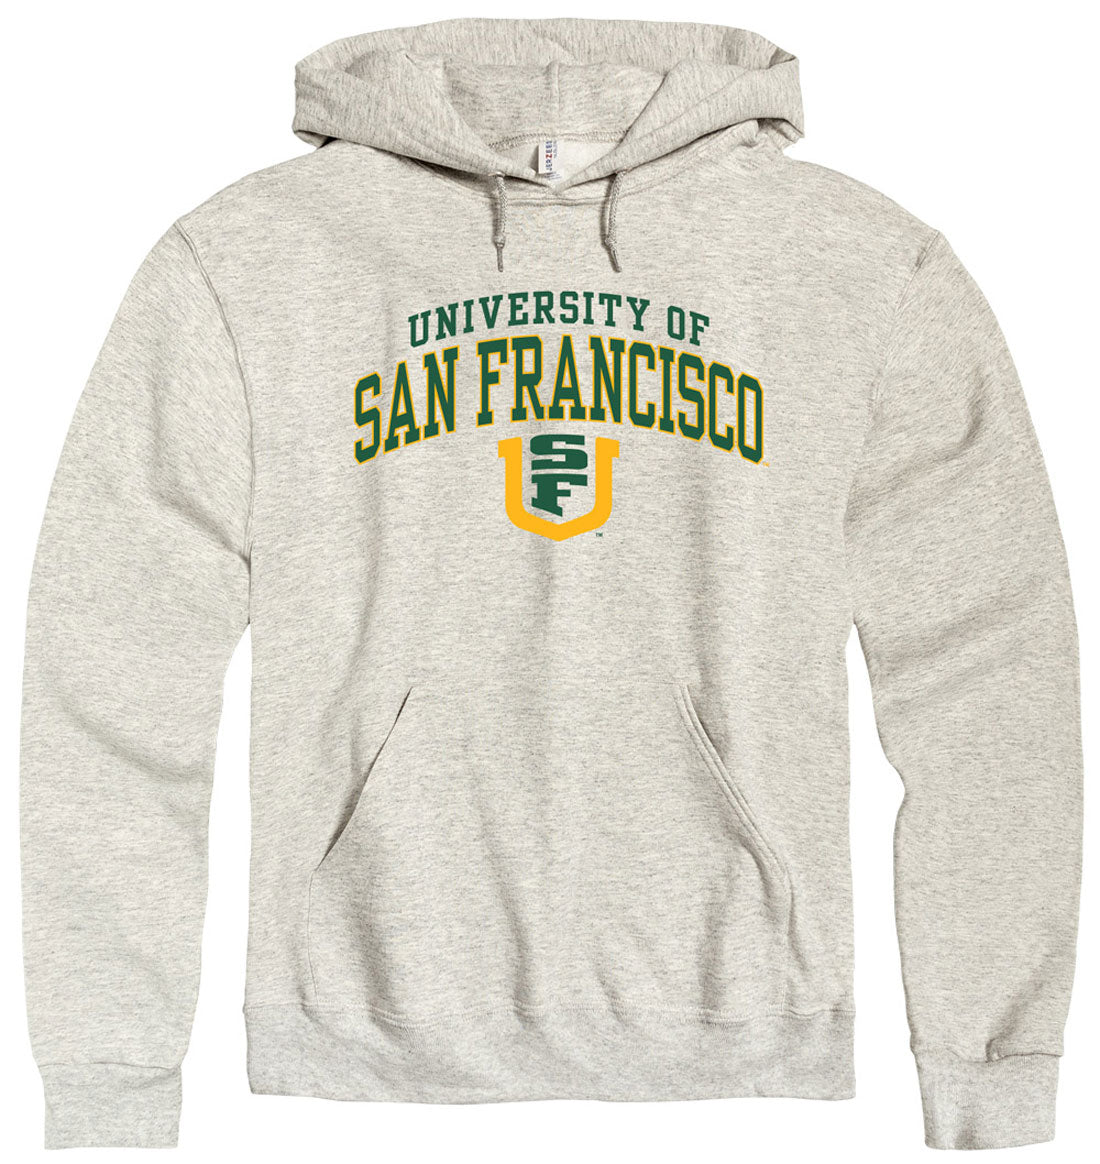 University of San Francisco USF Double Arch Hoodie Sweatshirt in Oatmeal | Men's | Size Small by New Agenda